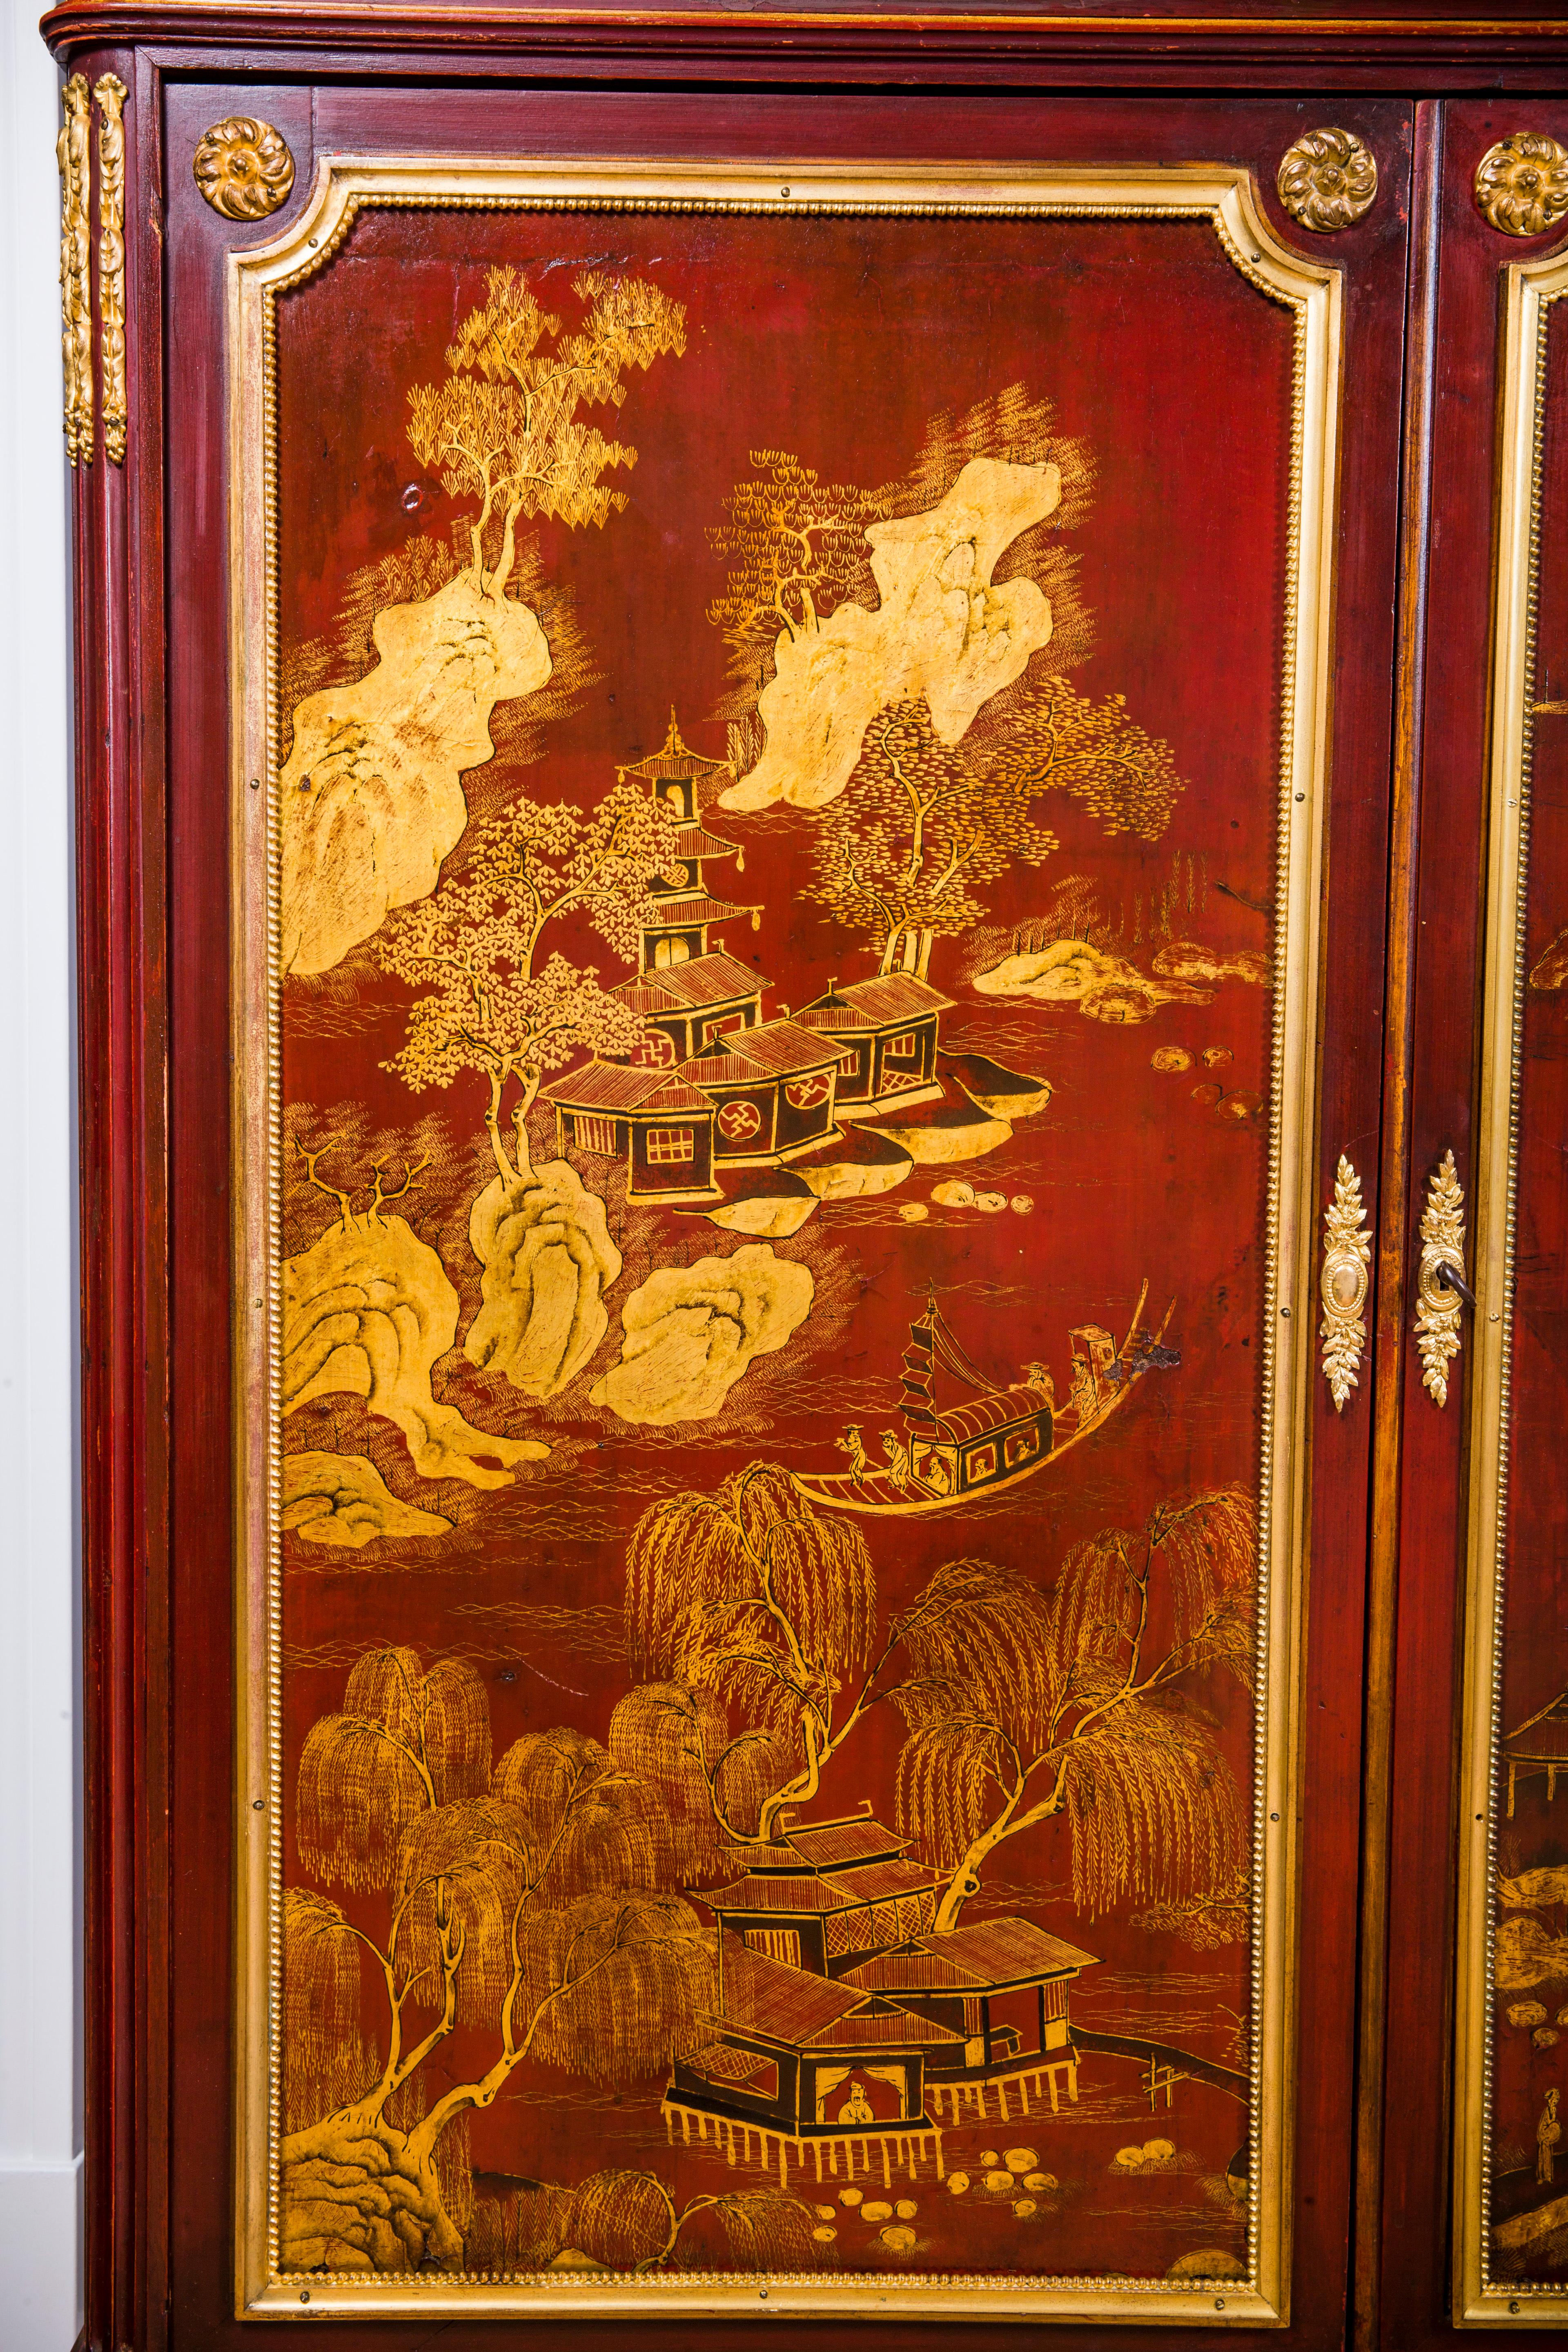 Chinoiserie wood cabinet with ormolu mounts and a fitted marble top
by Paul Sormani (French, 1817-1877)
rectangular two-door cabinet, gilded and lacquer painted panels
Measures: H 54 in., W 43 in., D 16 in.

 